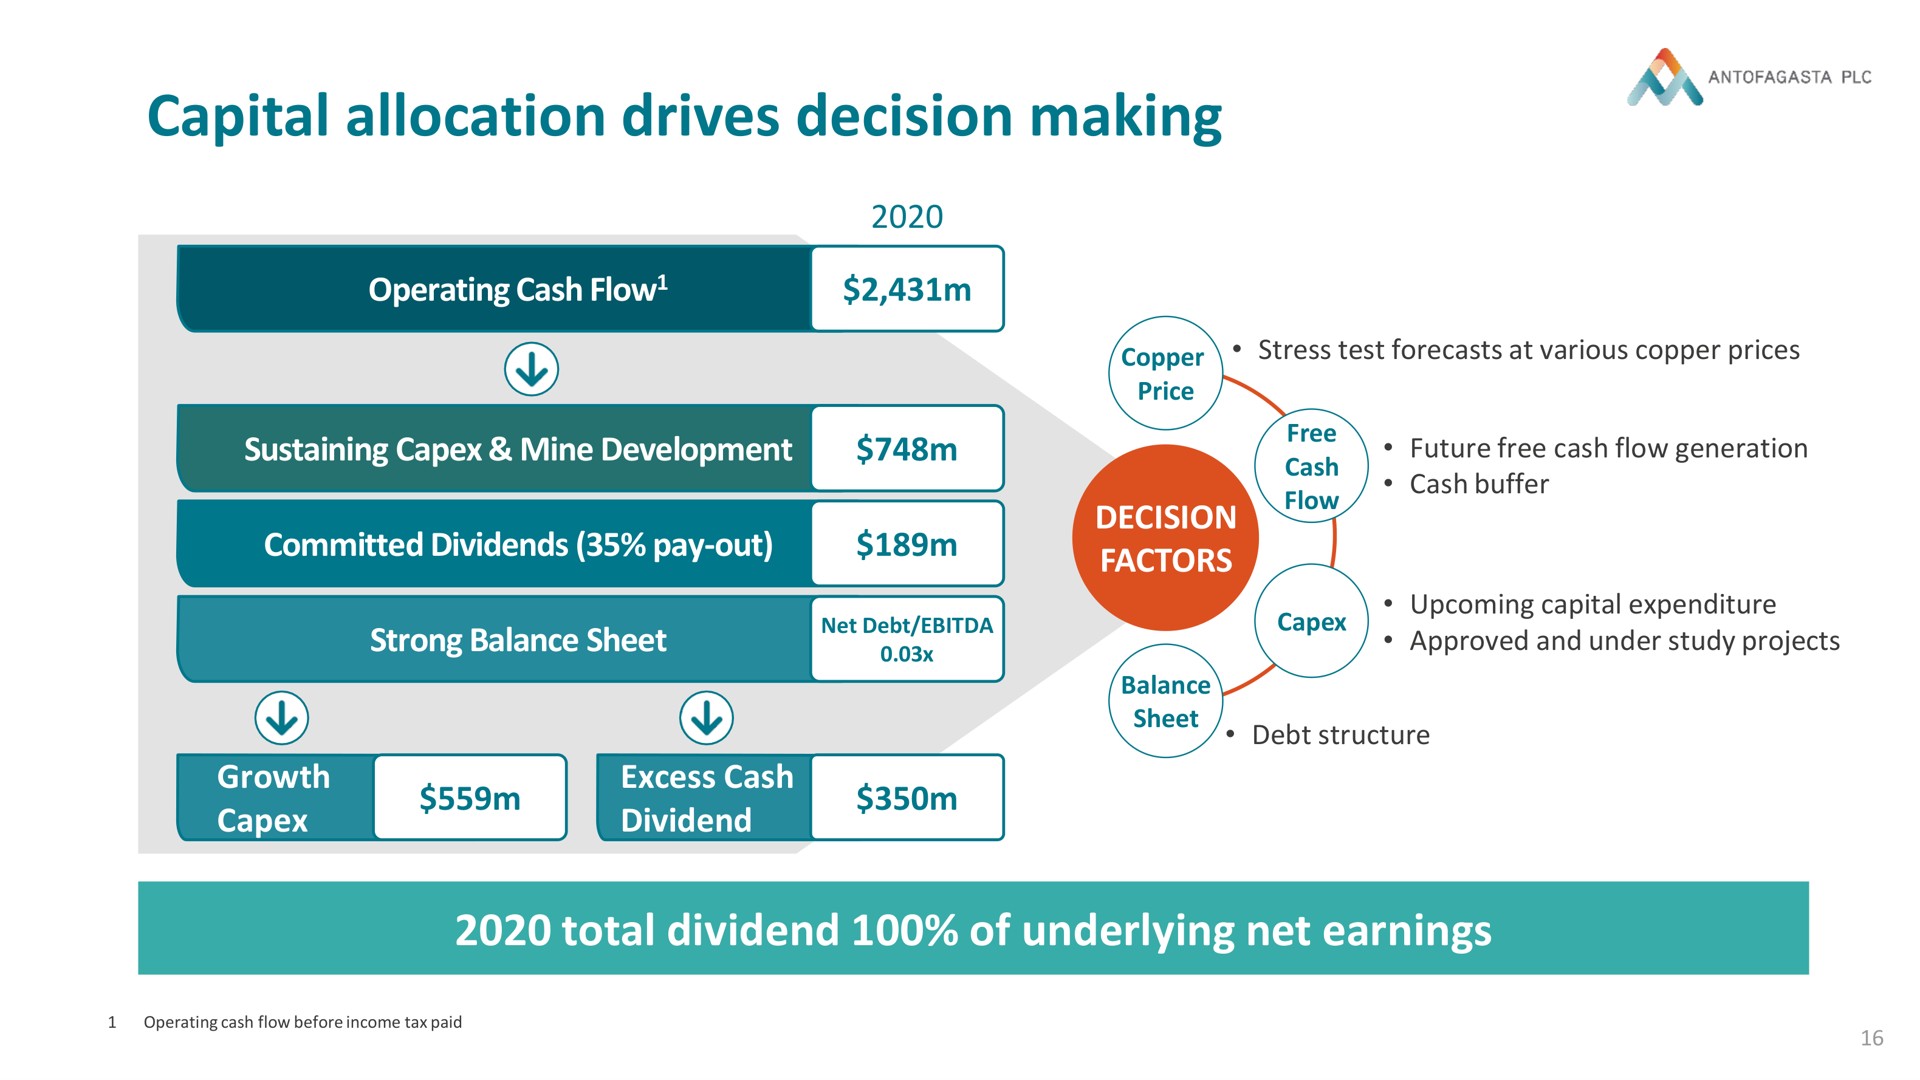 capital allocation drives decision making factors total dividend of underlying net earnings | Antofagasta